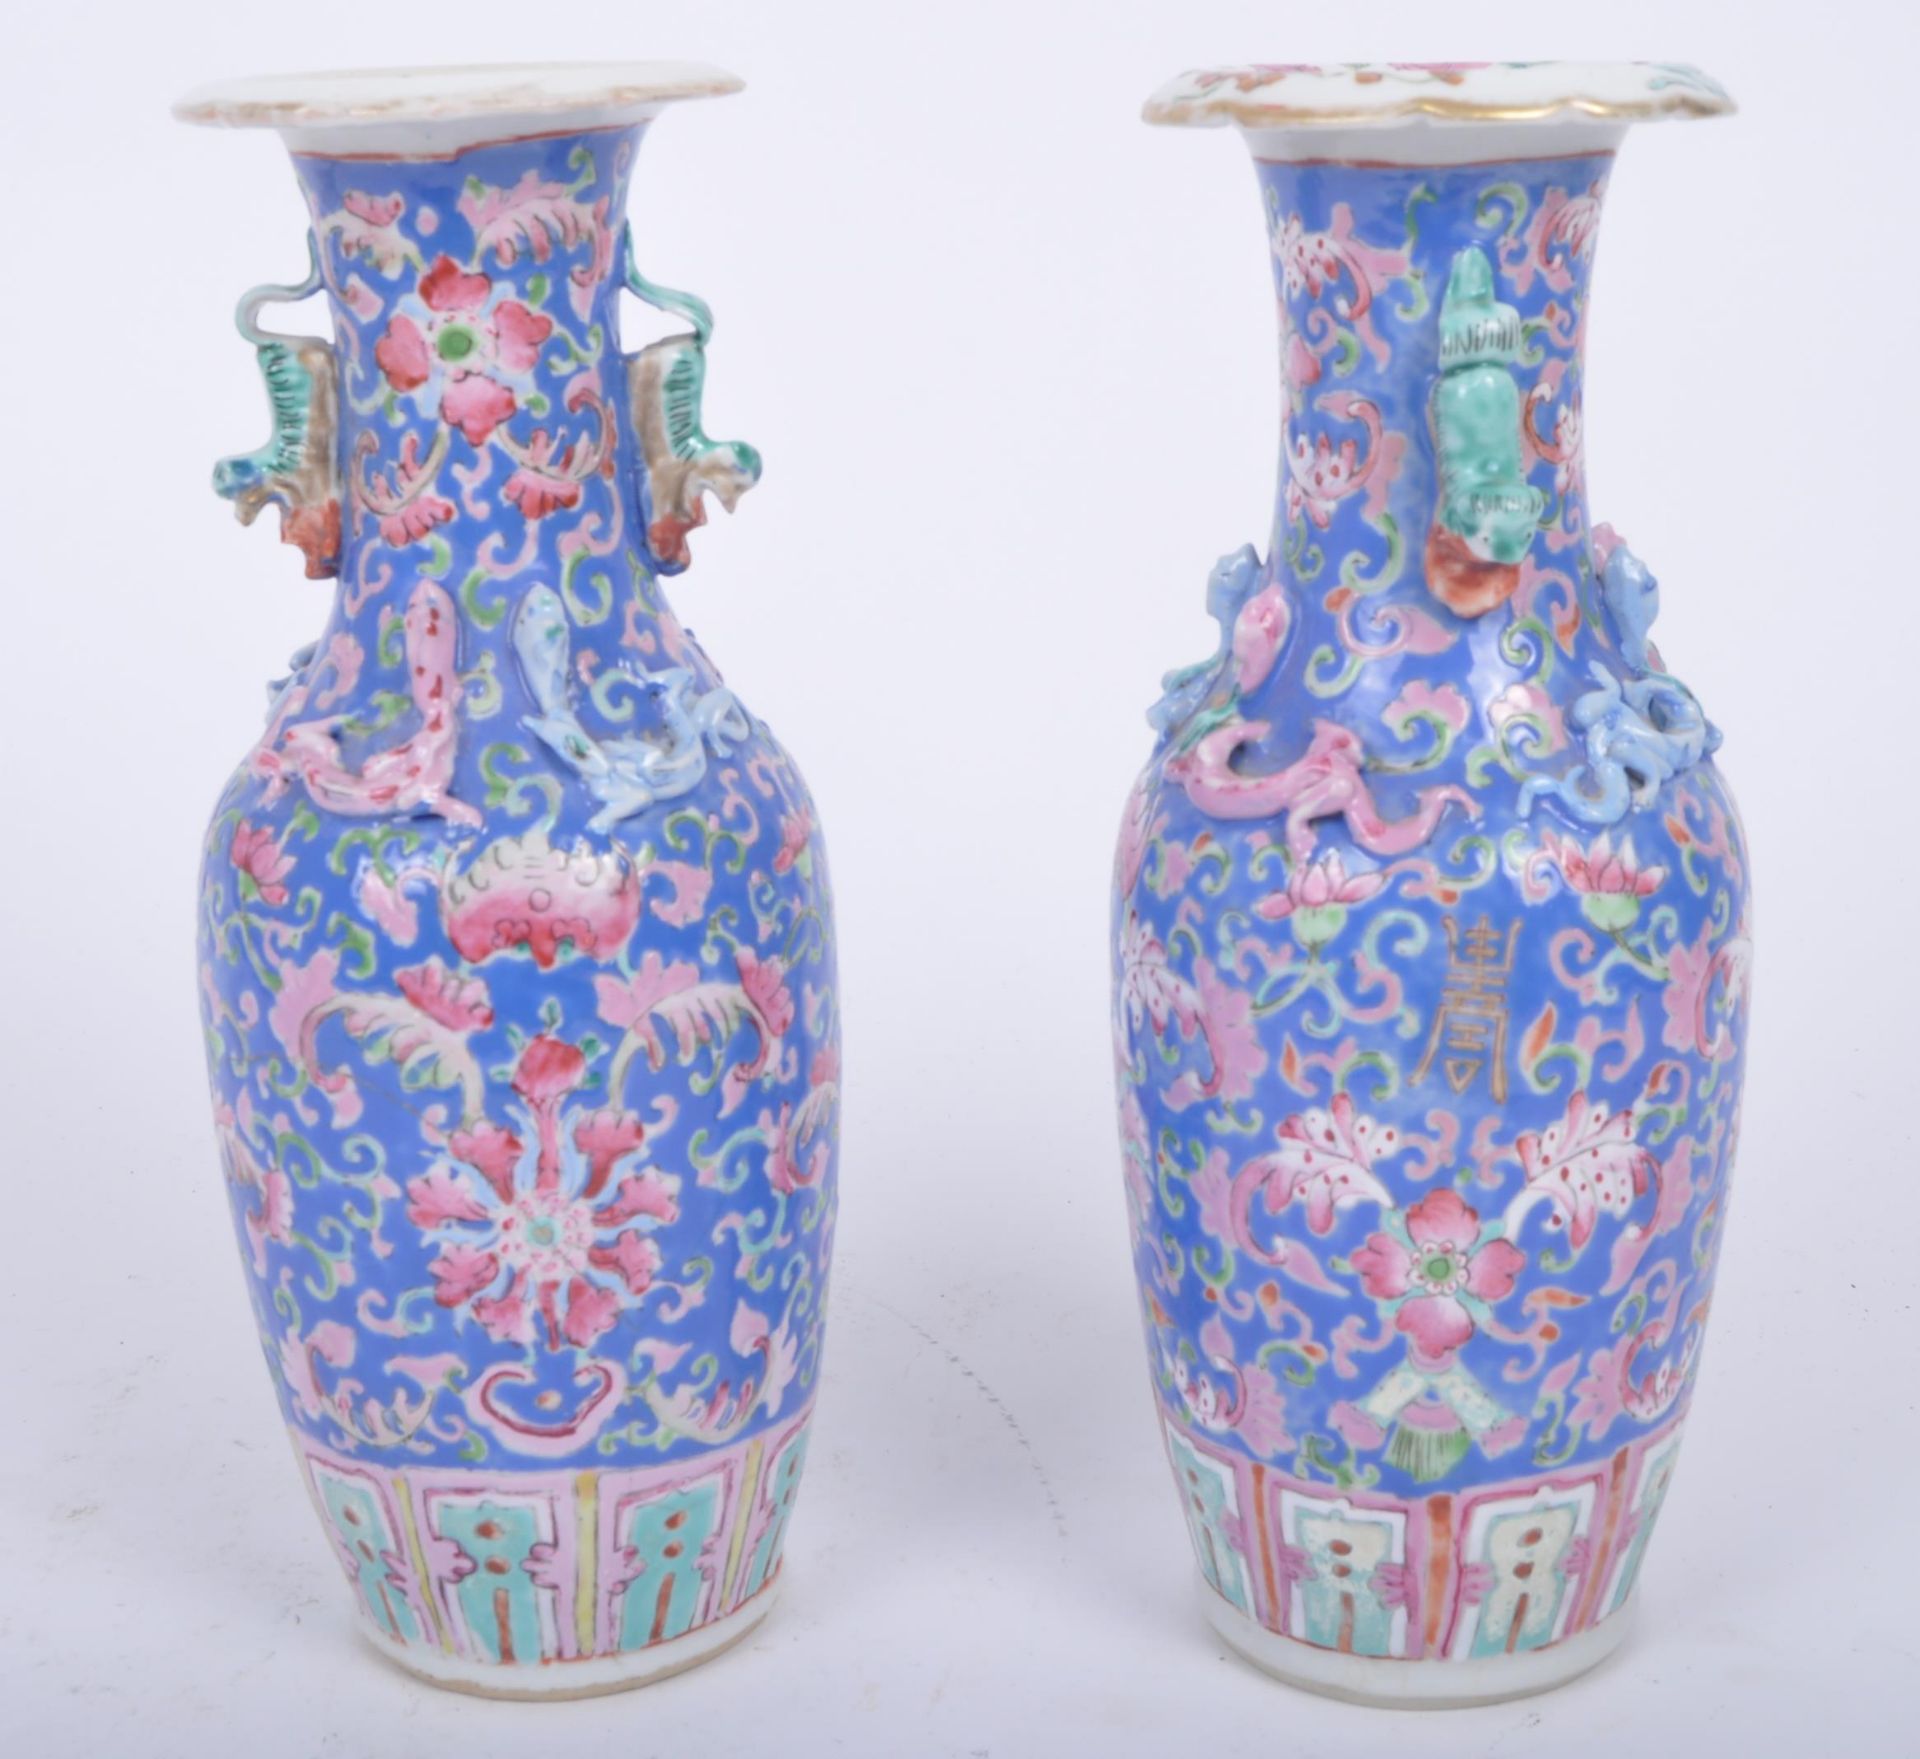 PAIR OF LATE 19TH CENTURY CHINESE CERAMIC FAMILLE ROSE VASES - Image 5 of 6